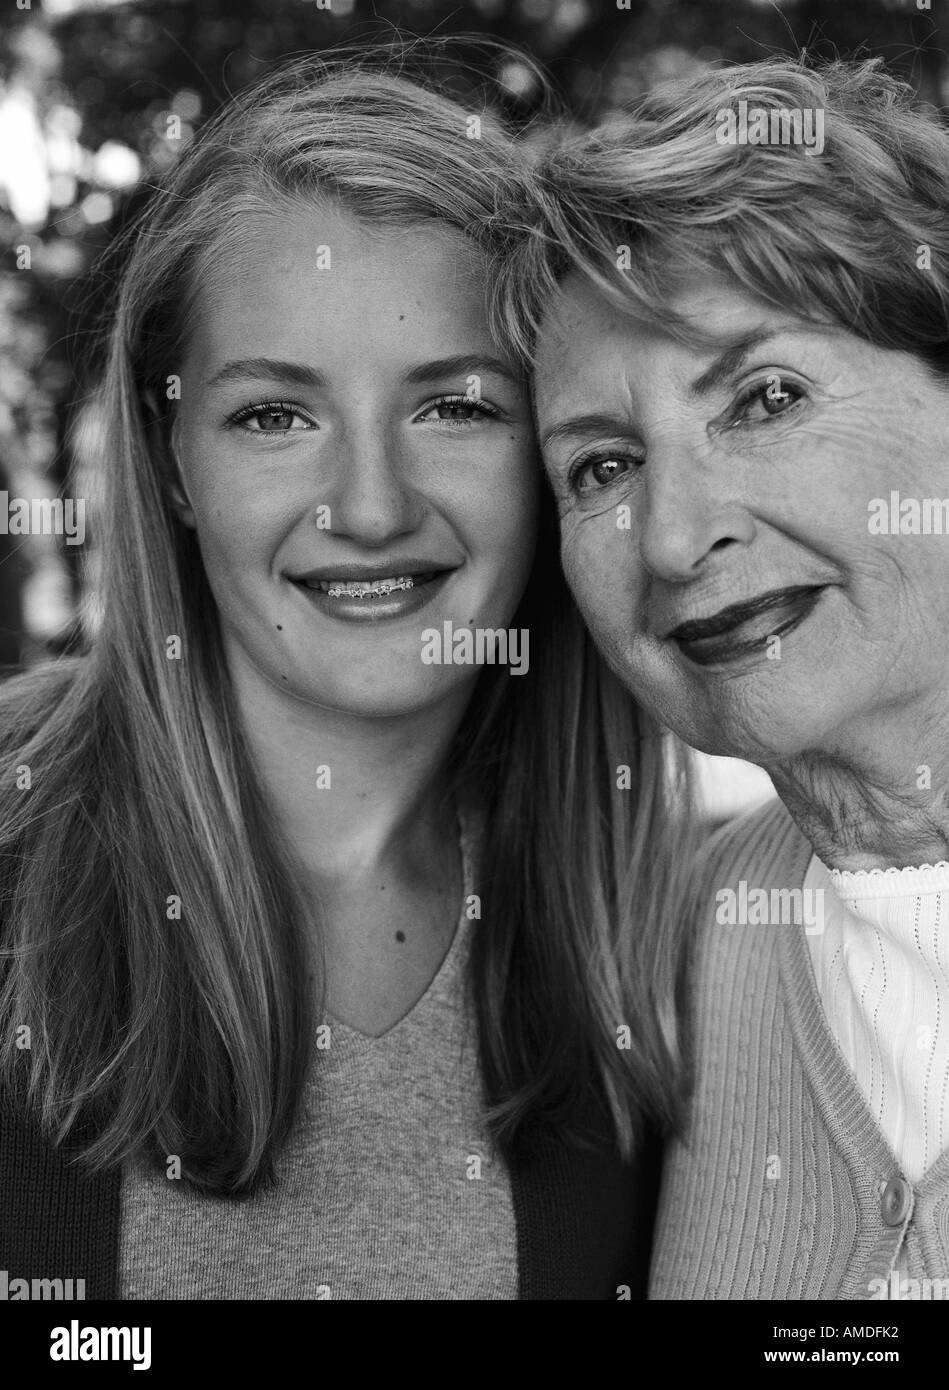 Portrait of Grandmother and Granddaughter Outdoors Stock Photo